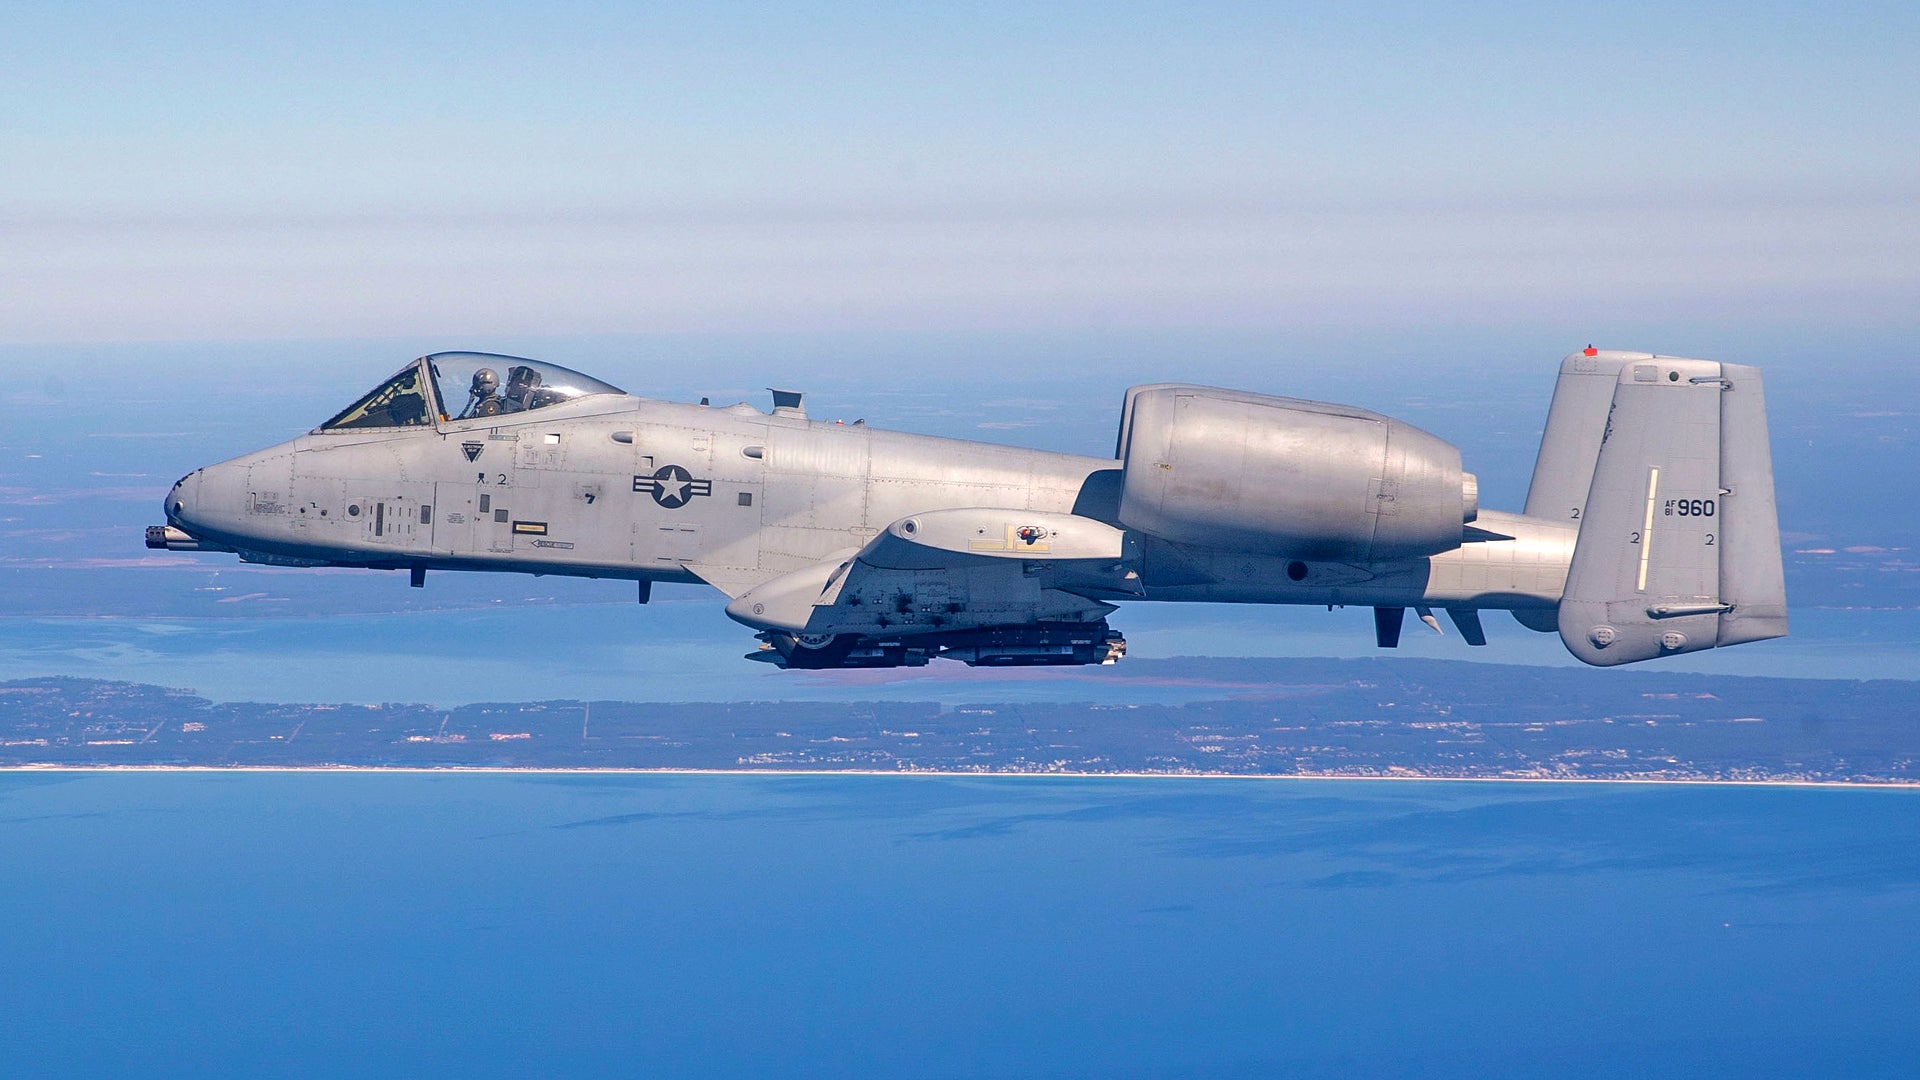 Maj Eric Hickernell from the 40th Flight Test Squadron flies an A-10C Thunderbolt II with Small-Diameter Bombs during a test near Eglin Air Force Base, Fla, Feb 9, 2022. The 96th Test Wing executes developmental tests of the A-10C, and improves its capability of carrying precision guided munitions and unguided munitions.  (U.S. Air Force Photo by Tech. Sgt. John Raven)